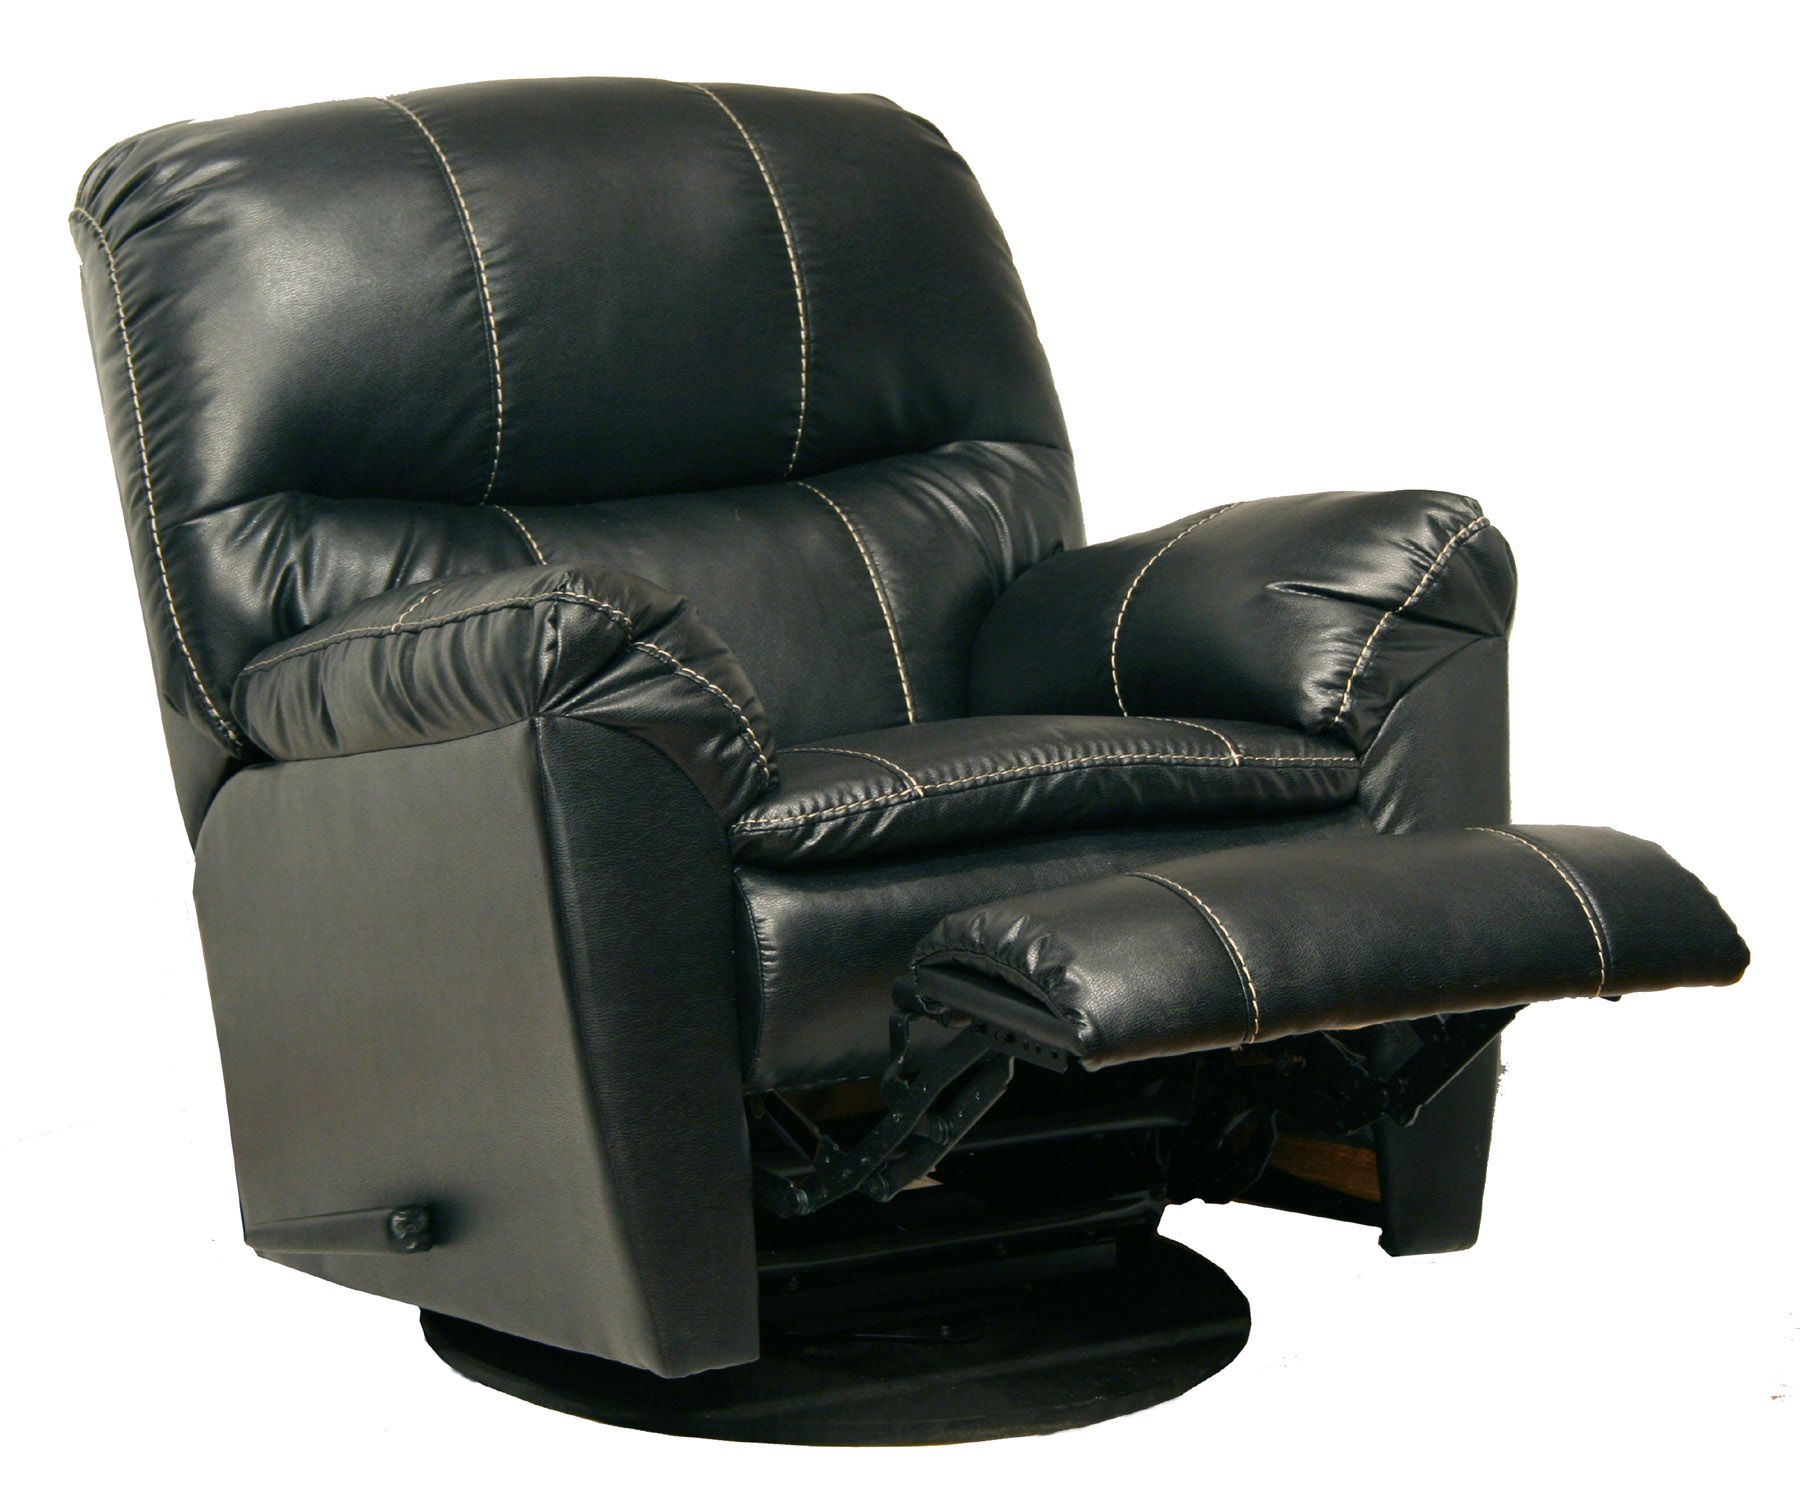 Catnapper Cosmo  Bonded Leather Swivel Glider Recliner Black - CLEVELAND CHAIR COMPANY